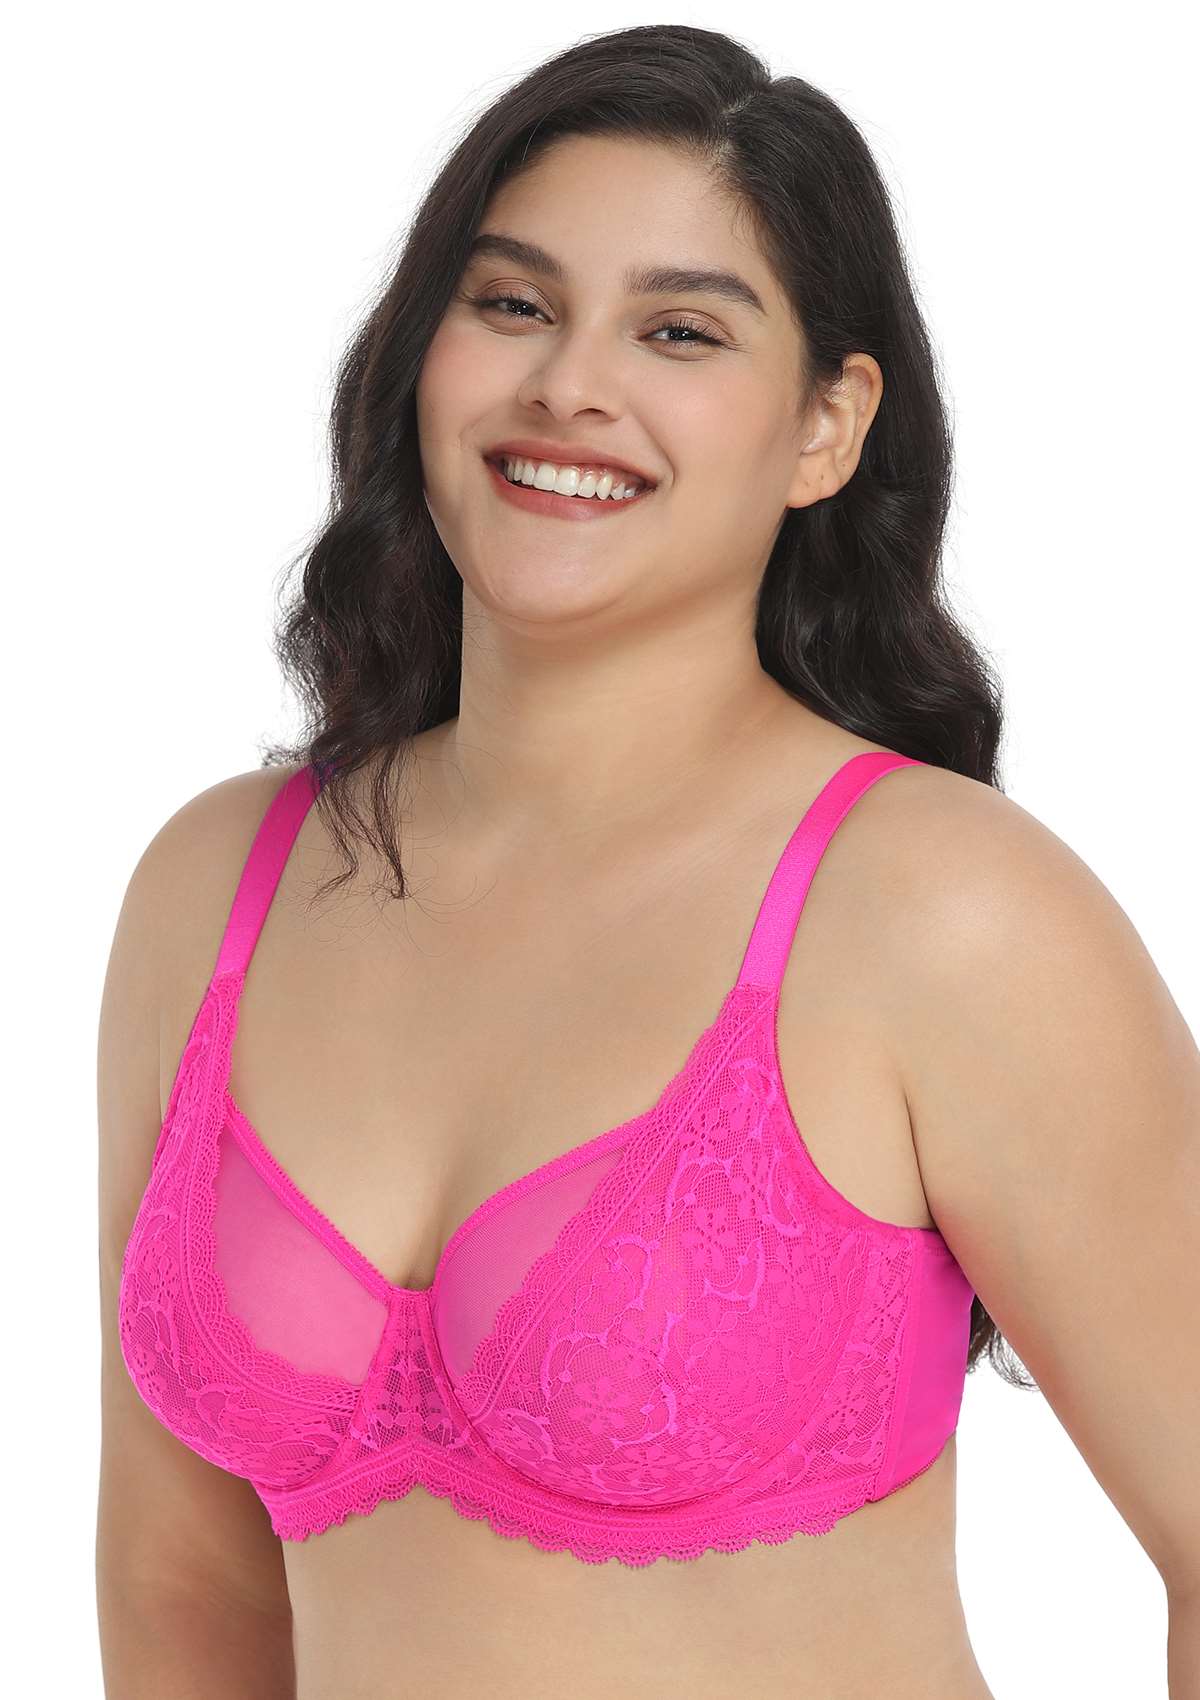 HSIA Anemone Lace Unlined Bra: Supportive, Lightweight Bra - Ginger / 34 / C